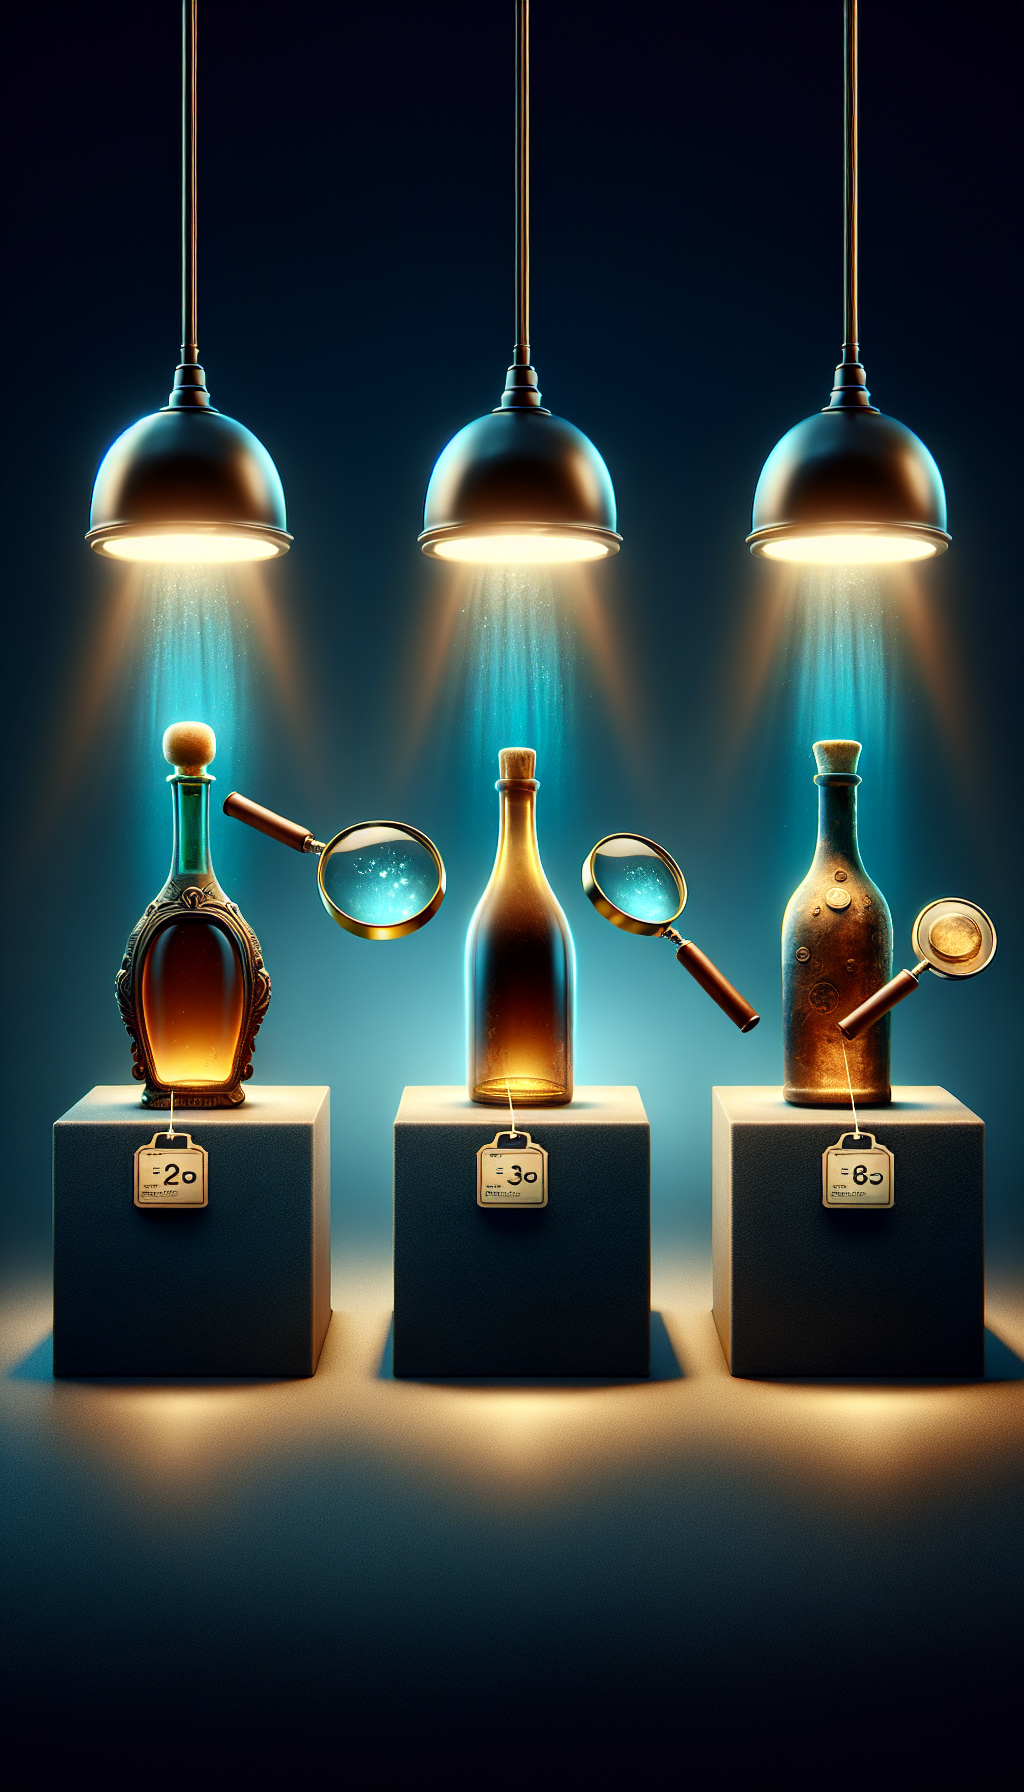 An illustration depicts a trio of vintage bottles each standing on a pedestal, akin to museum artifacts, under different spotlights. The first bottle gleams flawlessly, the second has mild patina, while the third shows distinct cracks. Above each, a magnifying glass inspects their condition, with price tags floating upwards, decreasing in value from left to right, symbolizing their respective worth.